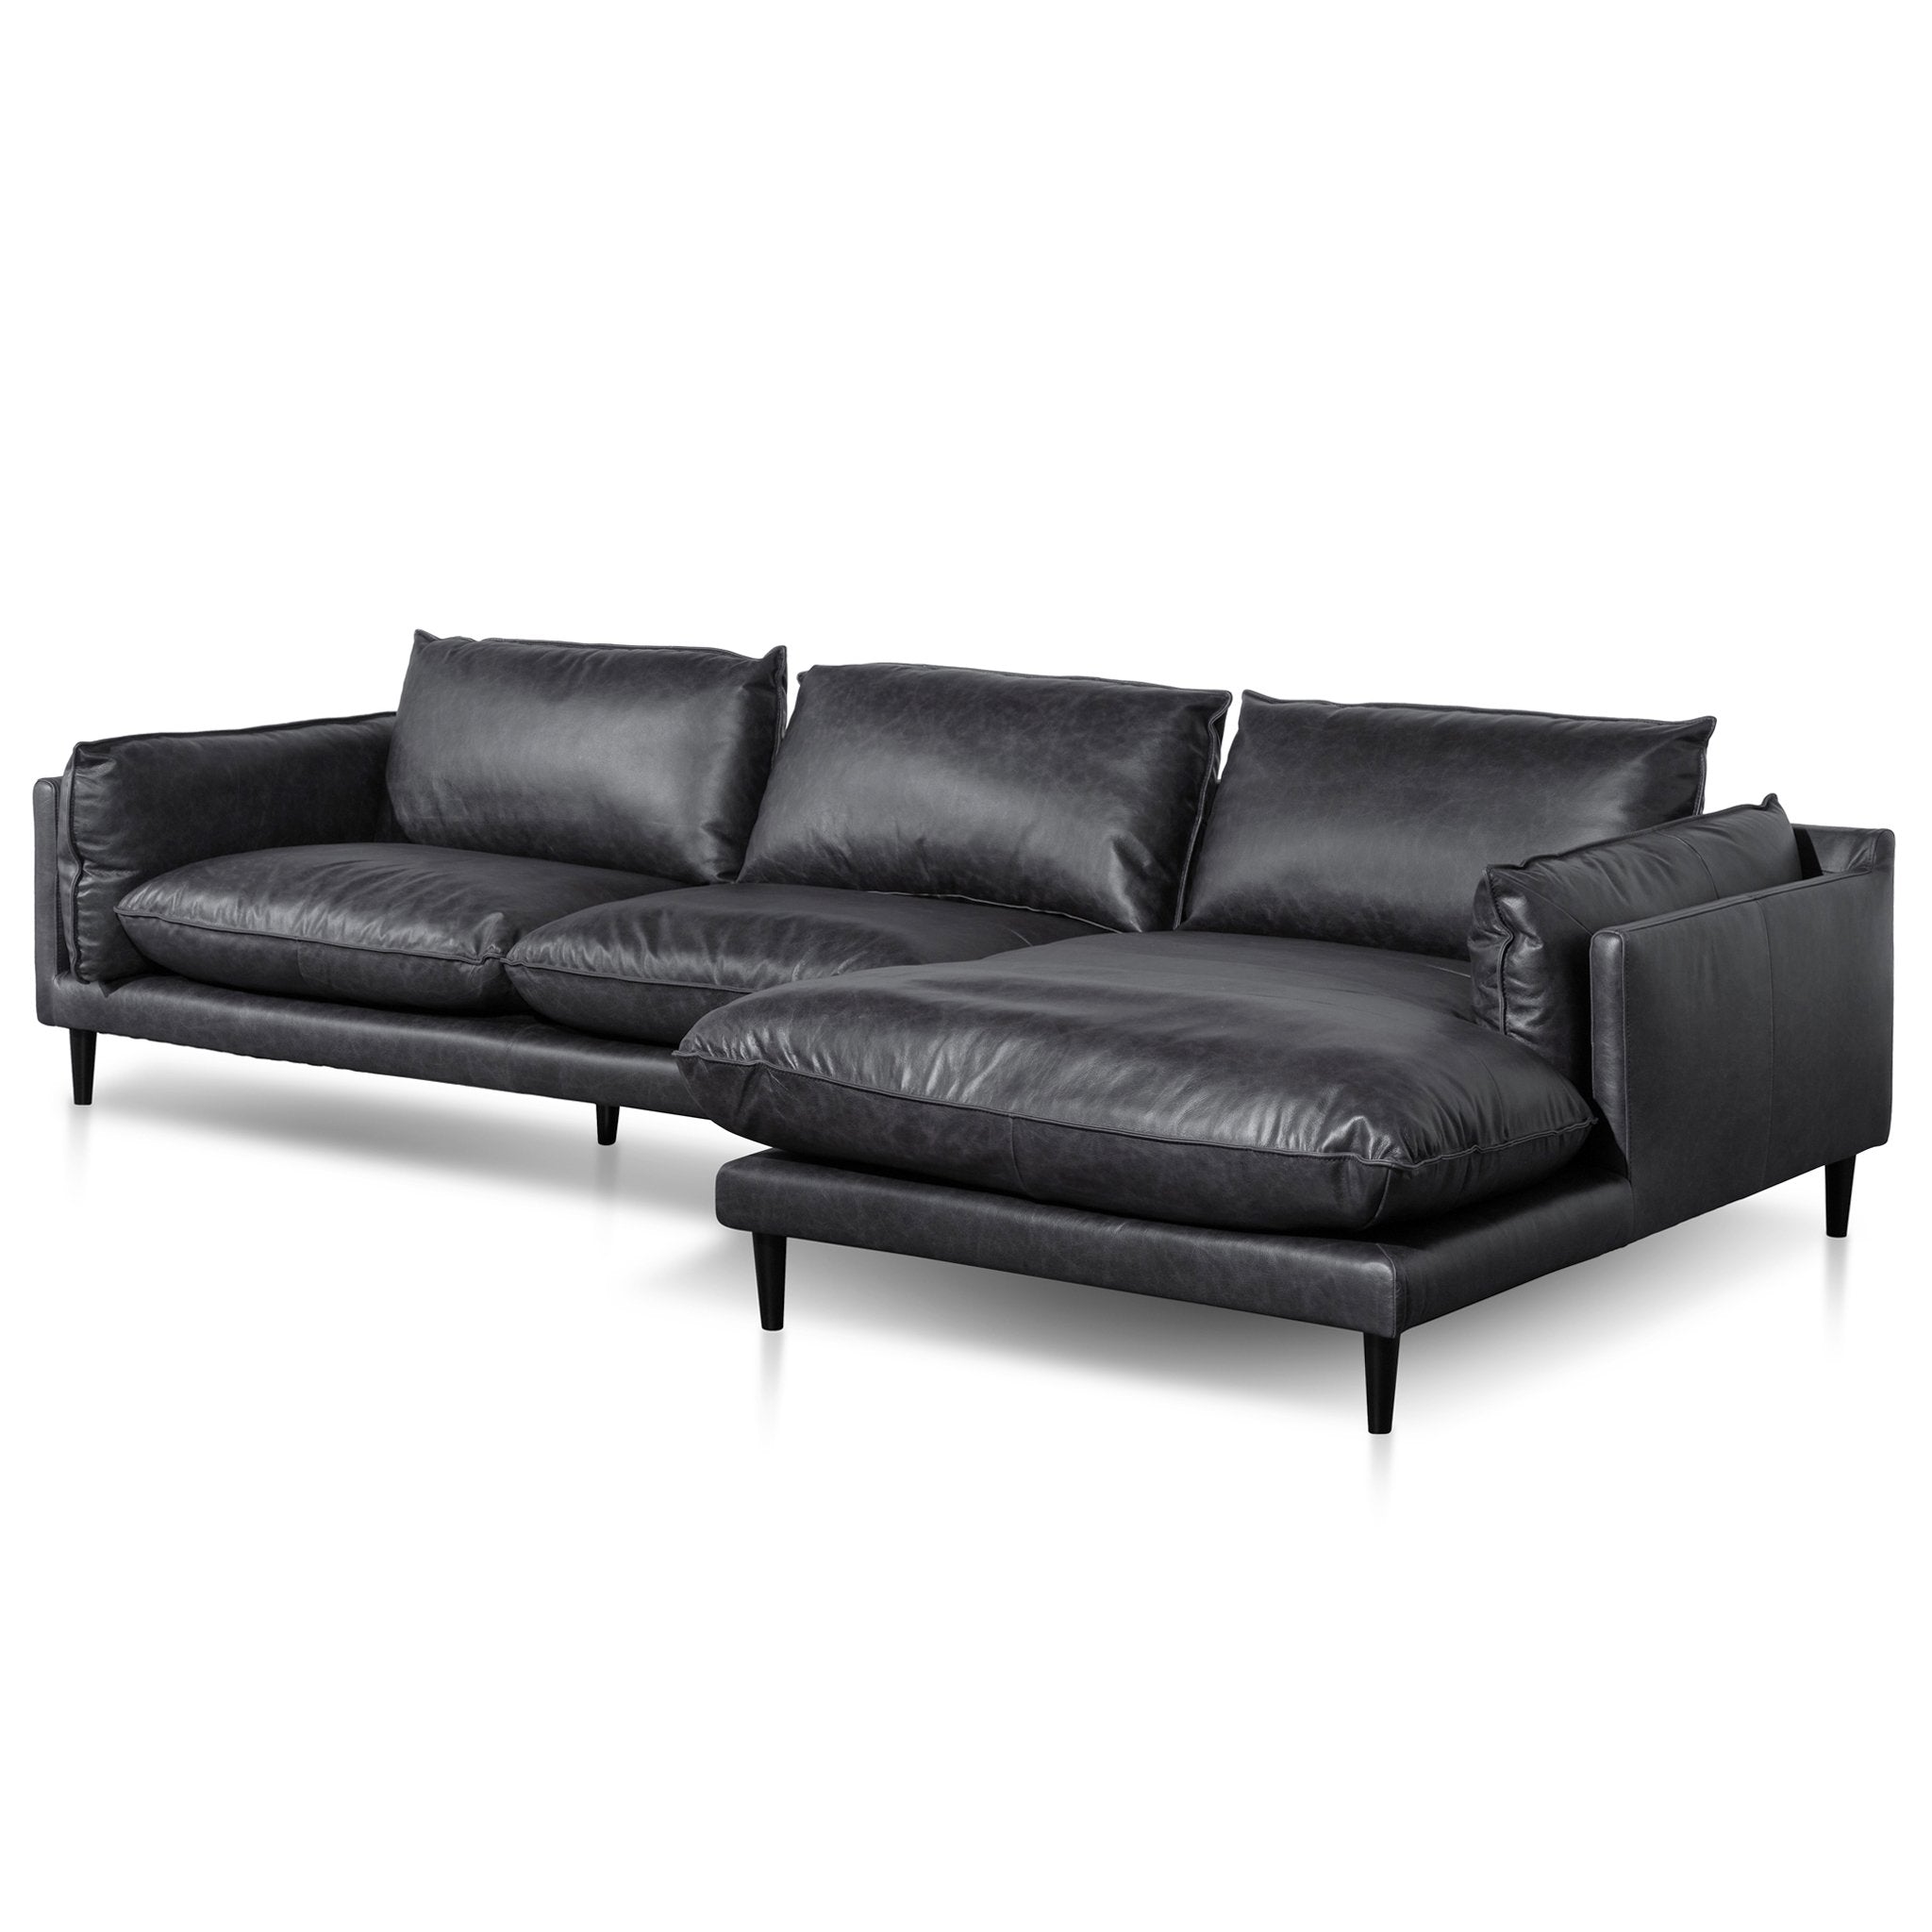 Savannah 4 Seater Right Chaise Leather Sofa - Charcoal